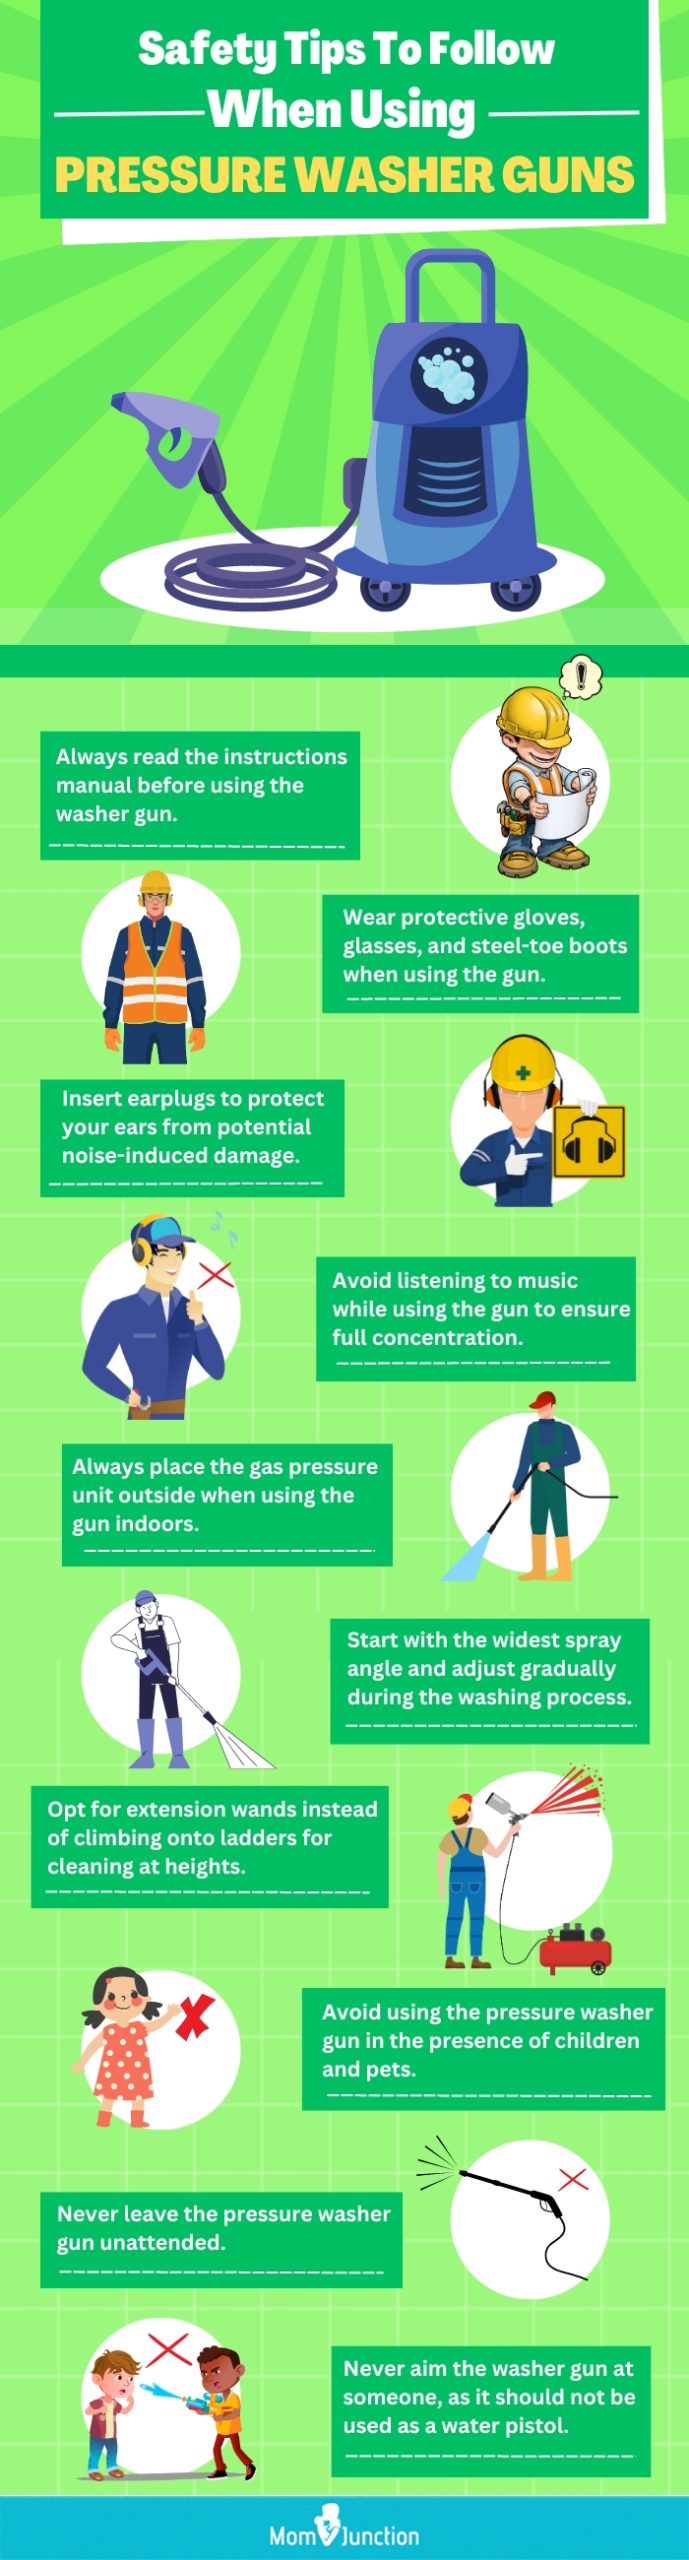 Safety Tips To Follow When Using Pressure Washer Guns (infographic)